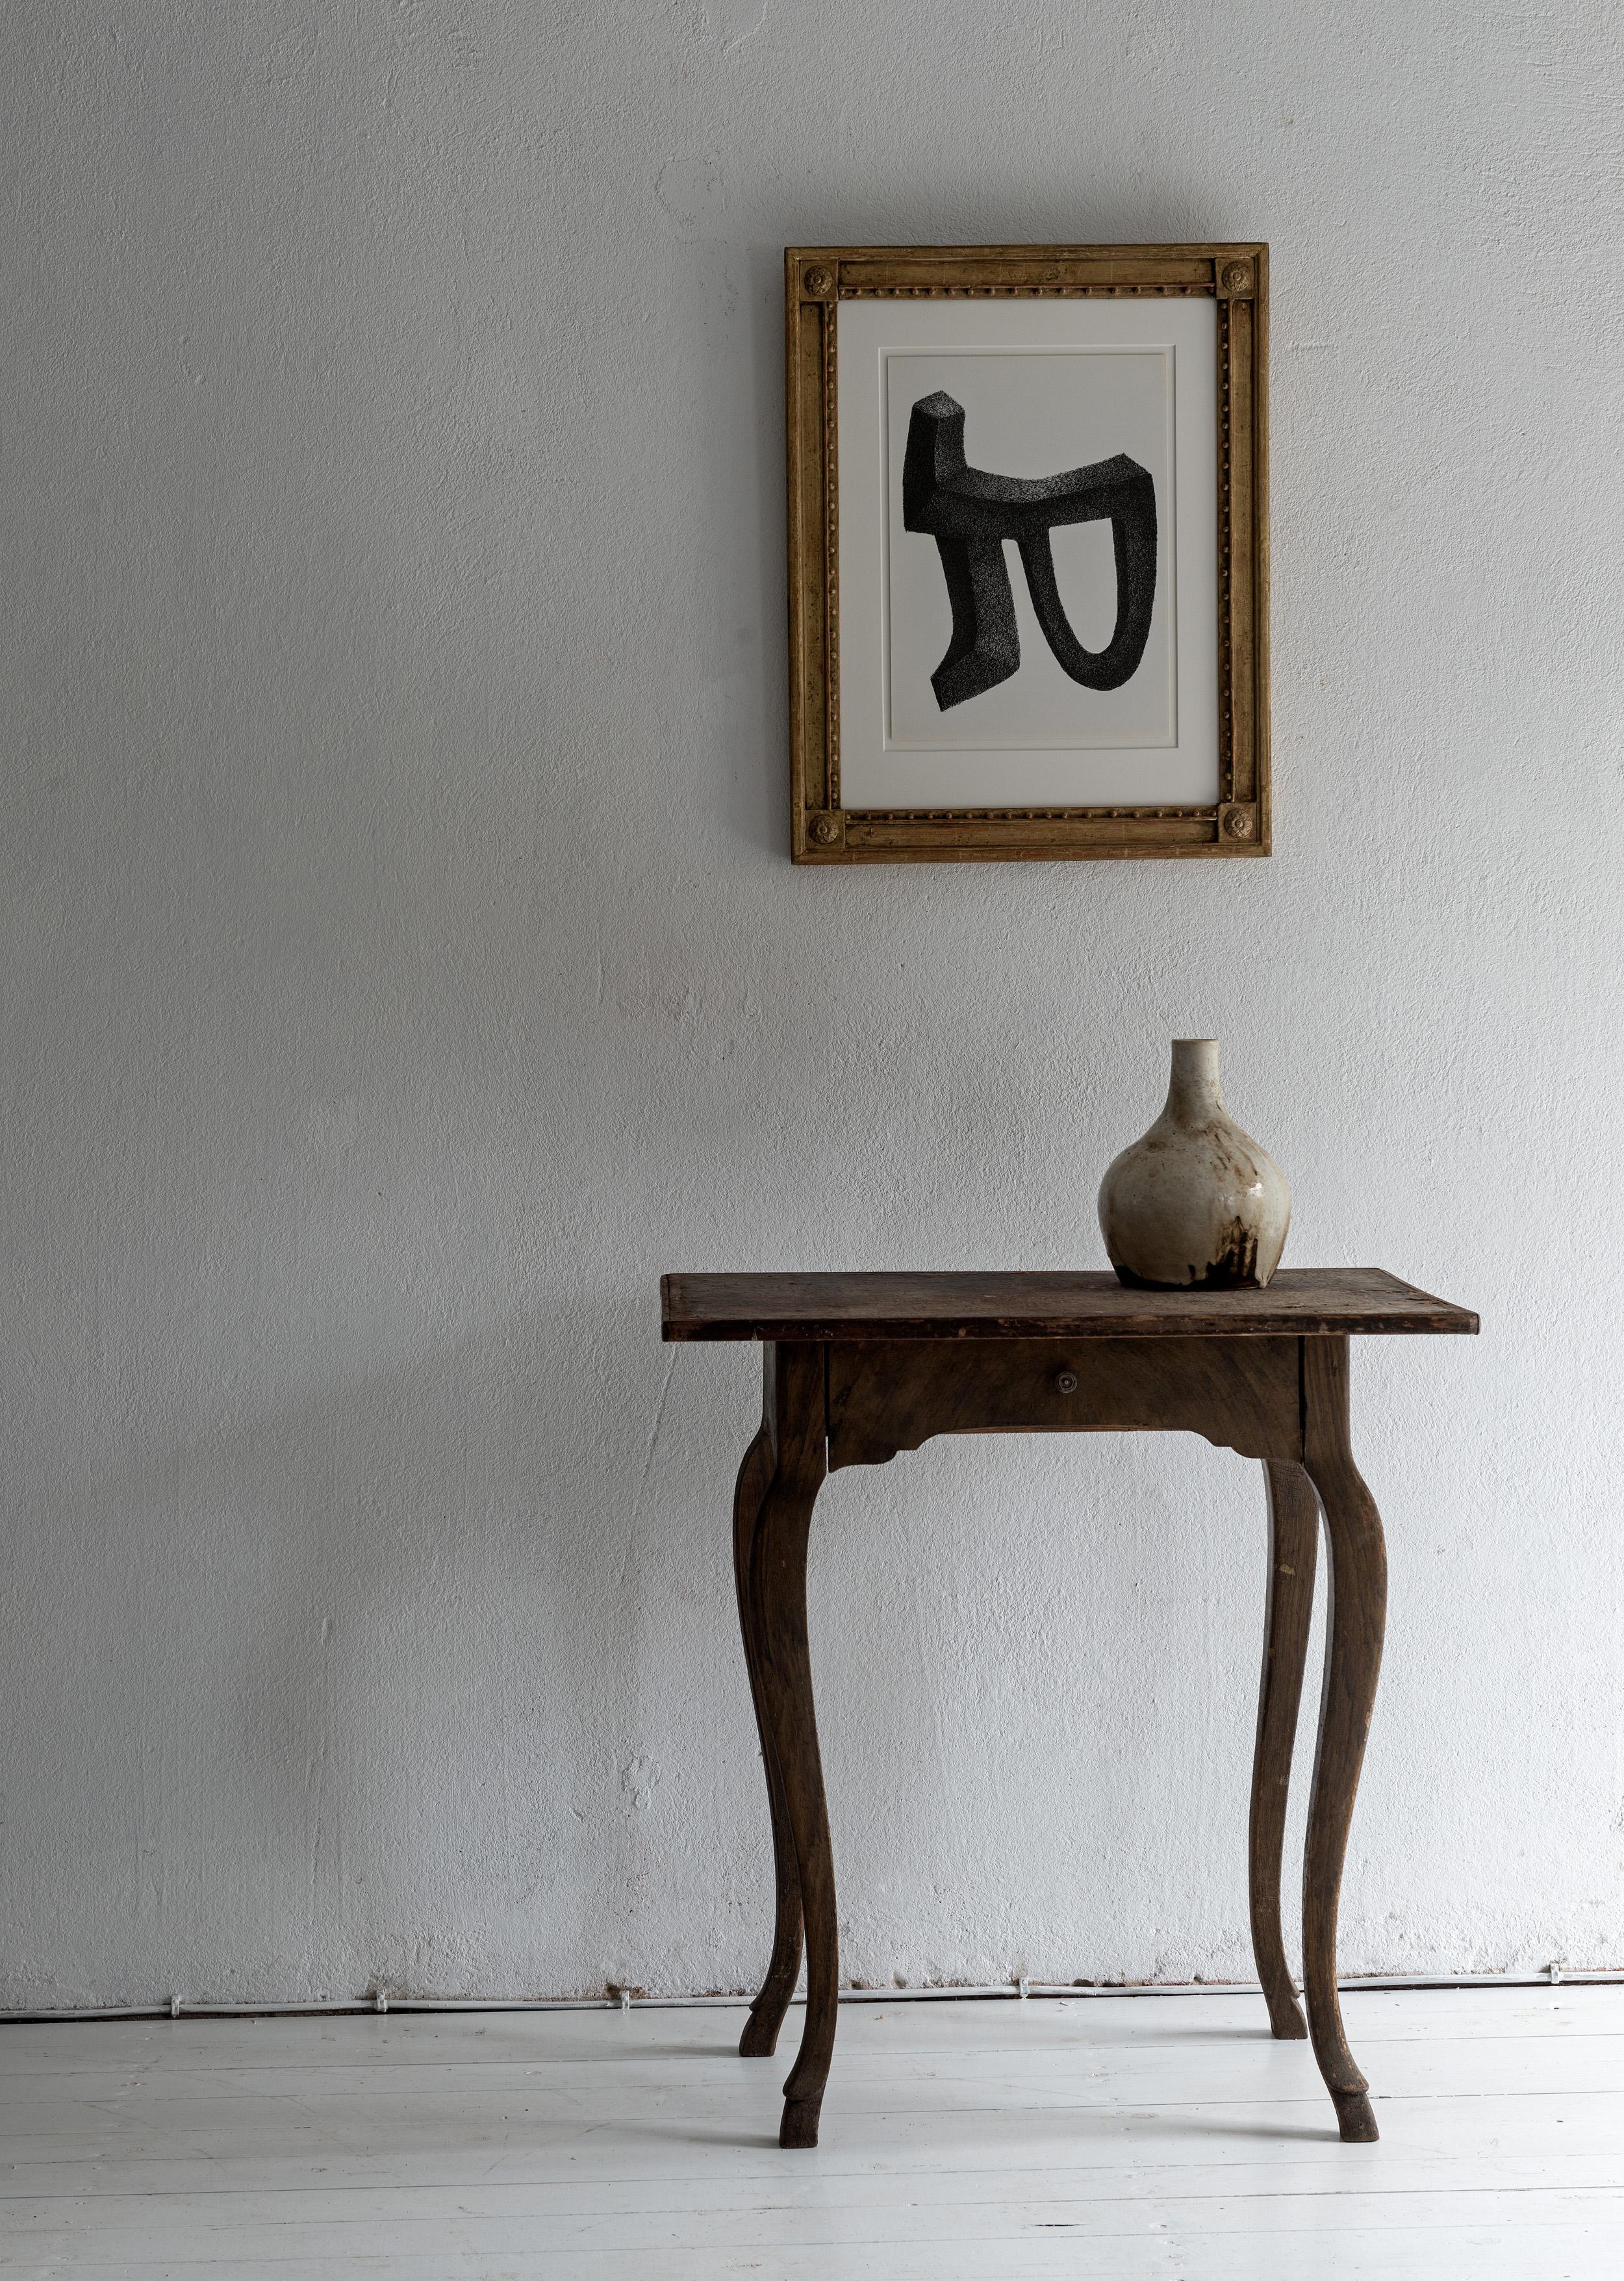 A very elegant 18th century small console table in original dark faux painted finish. Beautiful soft lines, works in a traditional or contemporary setting.